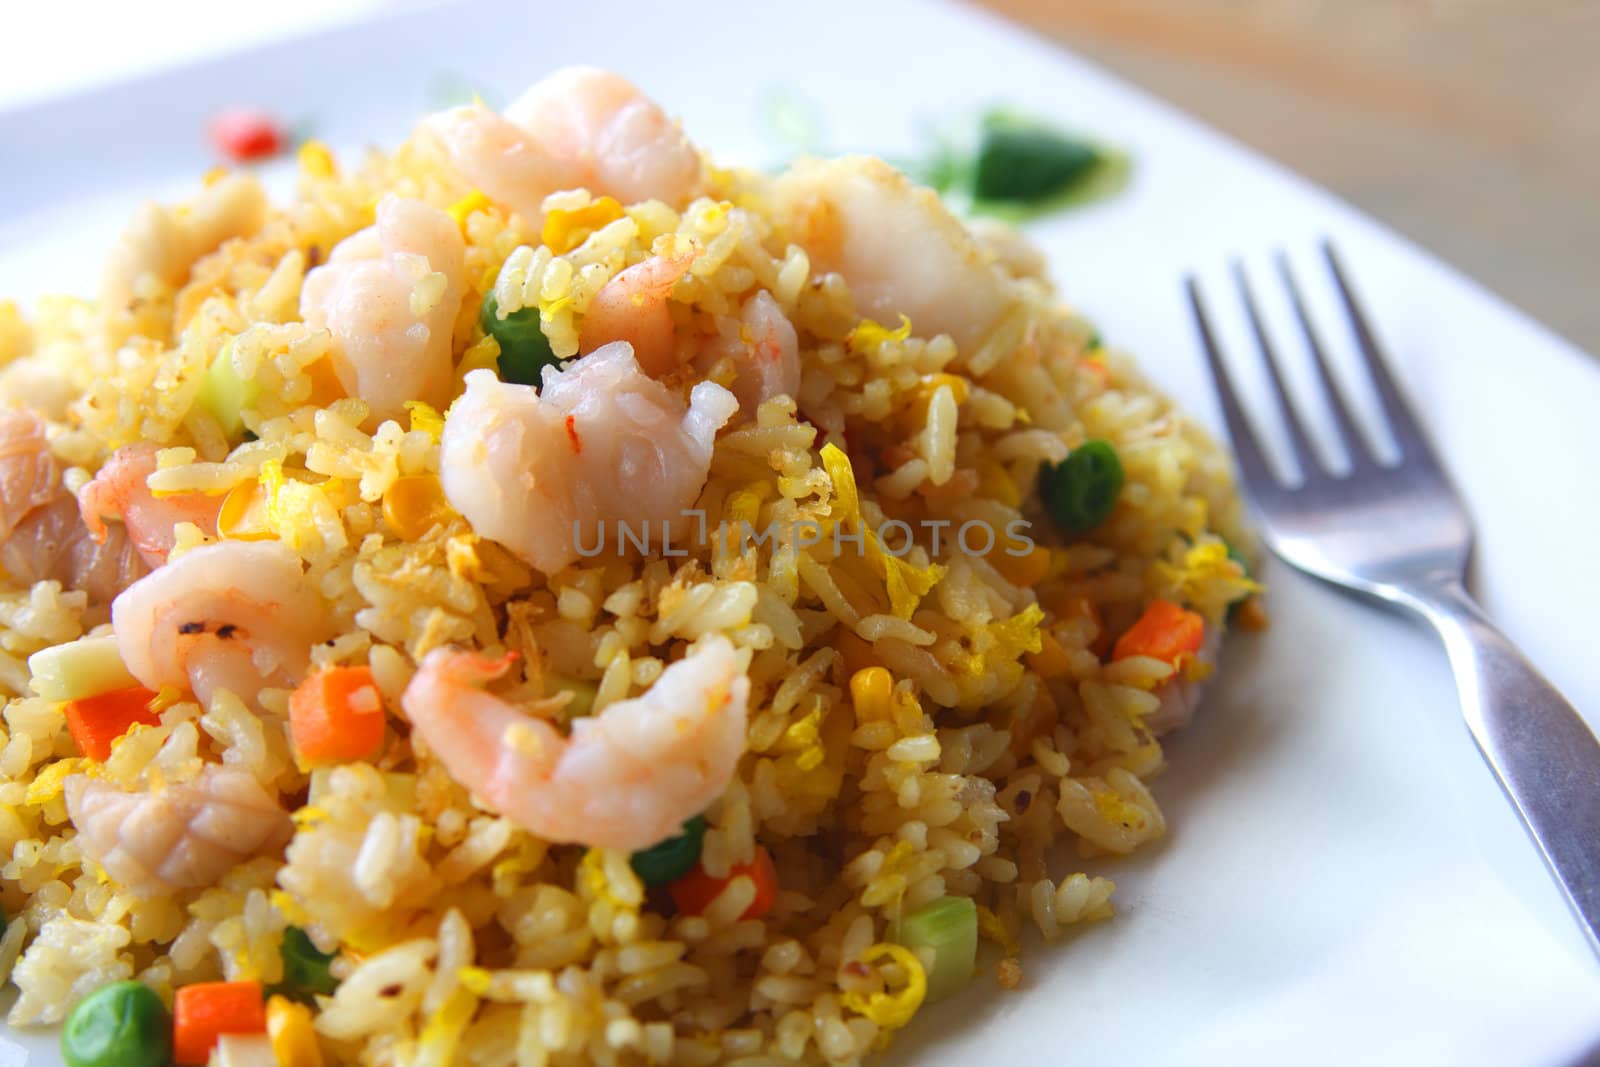 Asian Fried Rice by photosoup